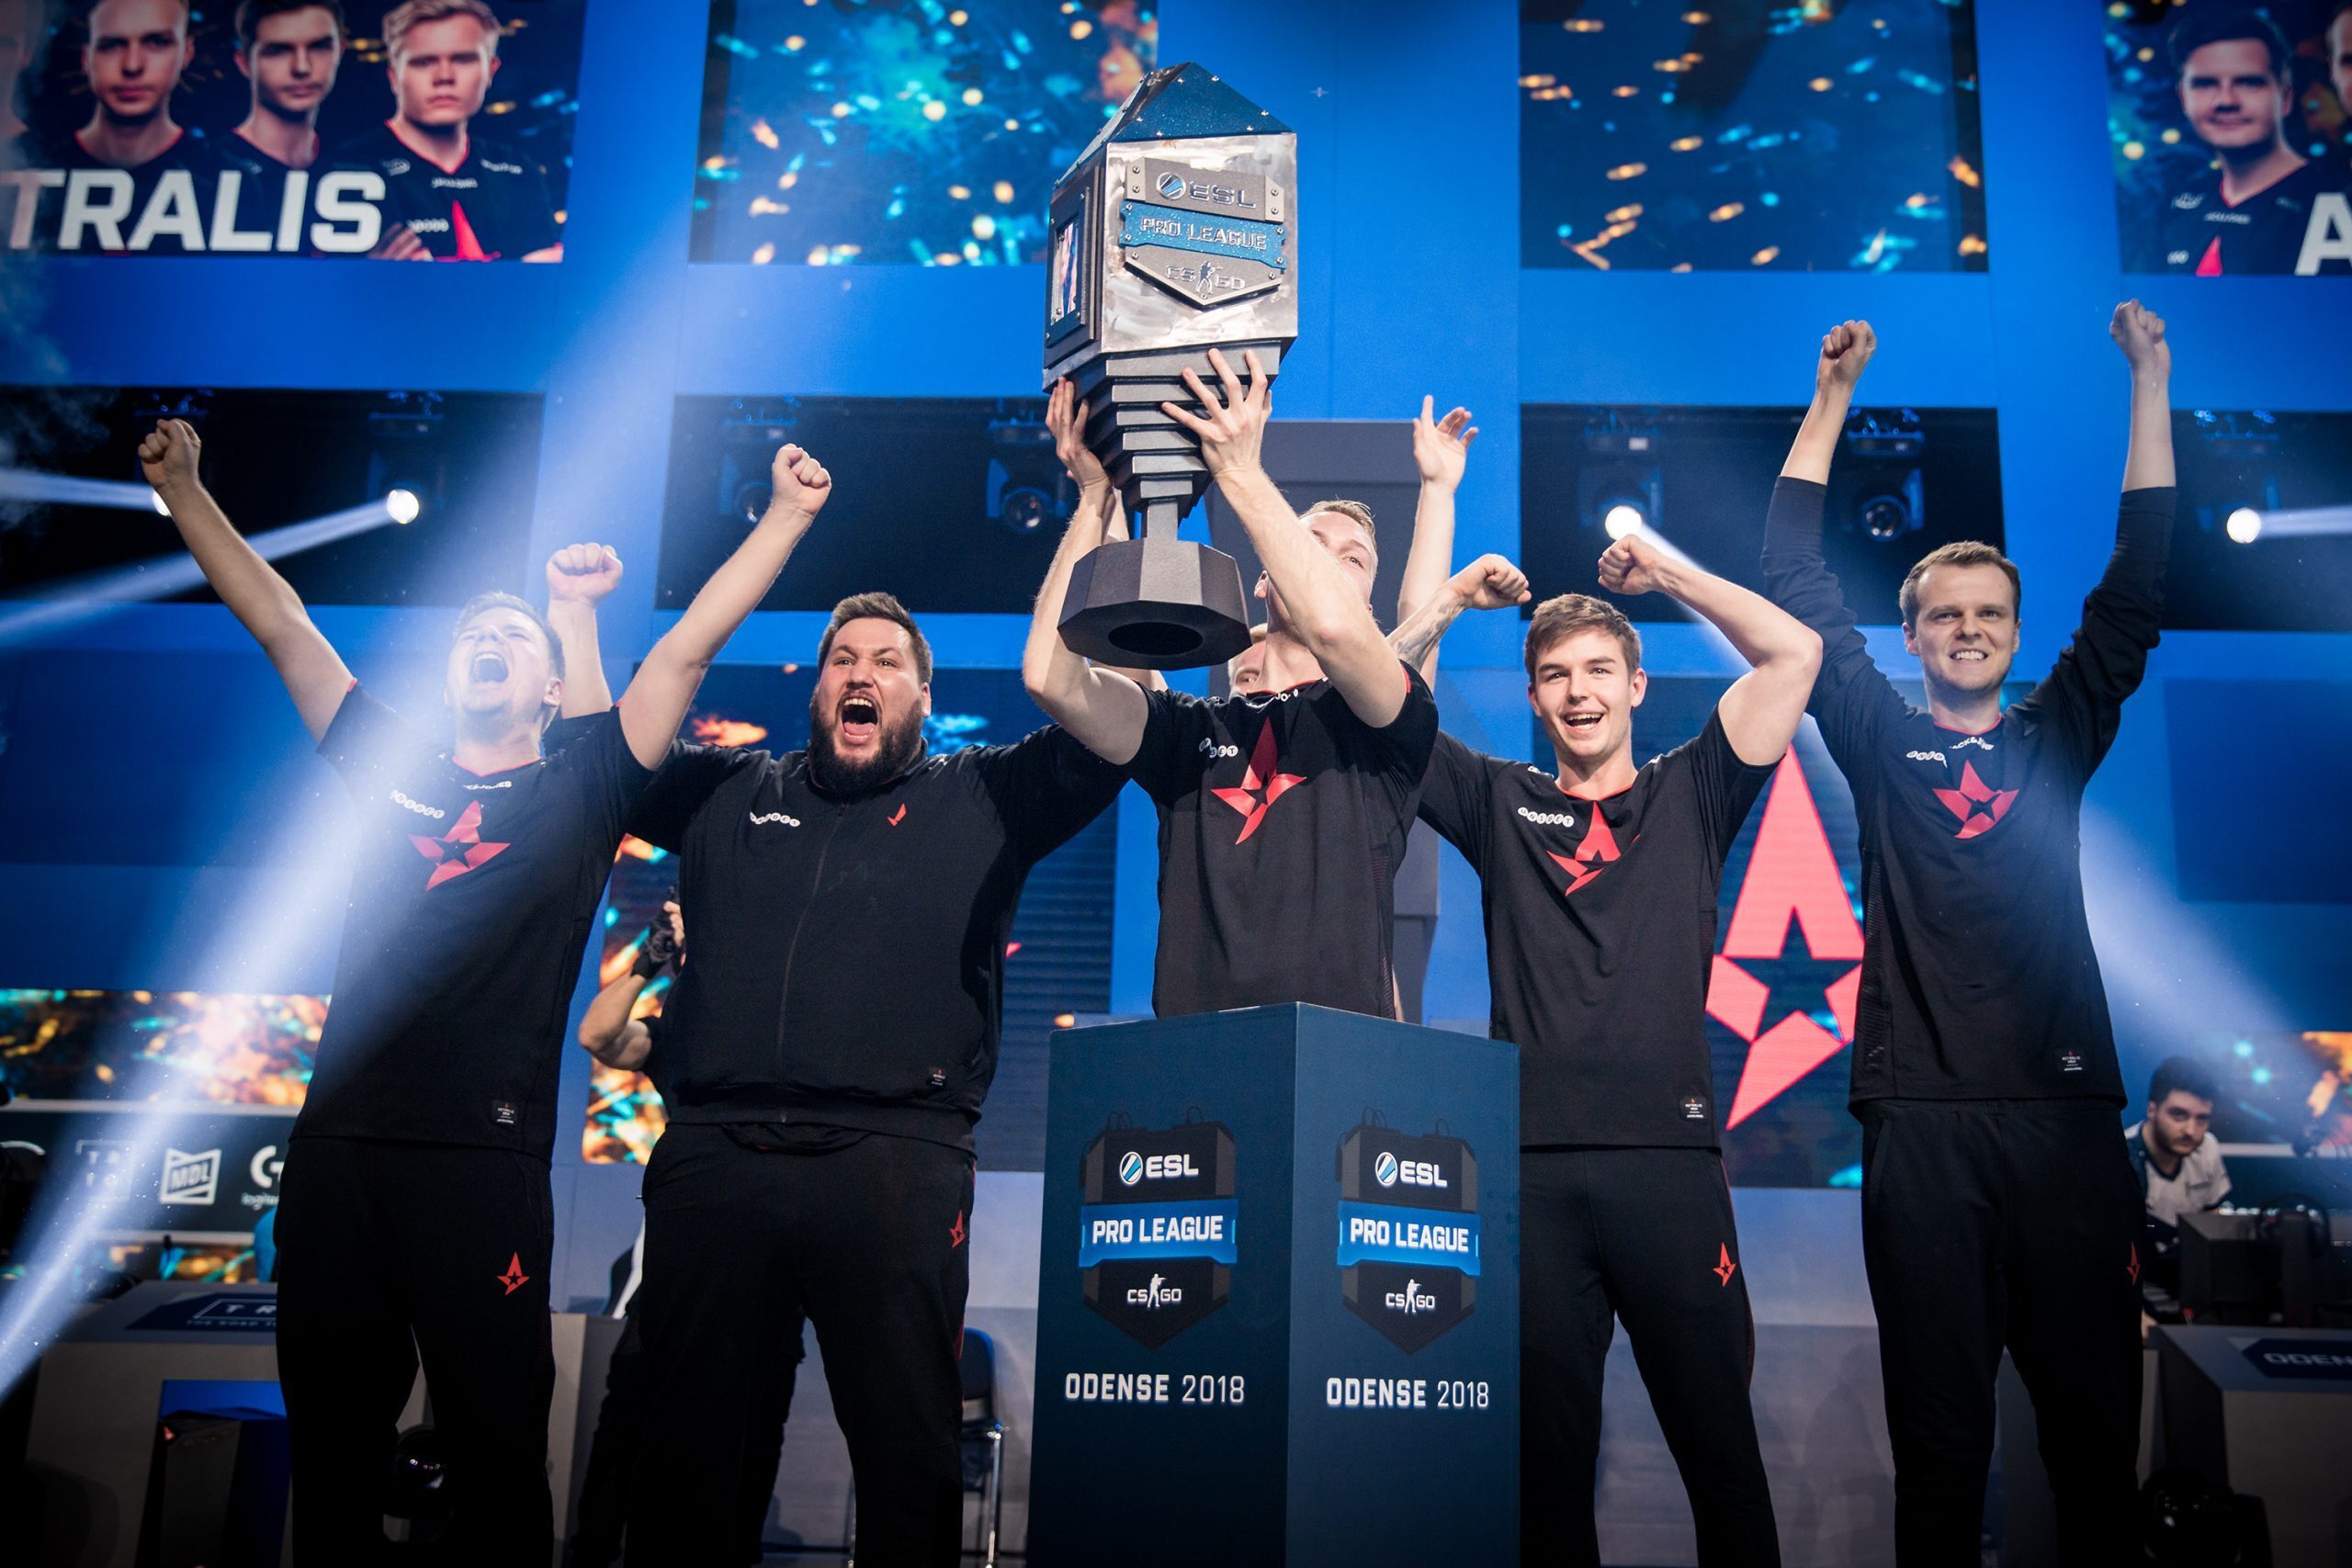 Astralis managed to win the ESL Pro League season 8 finals and the Intel Grand Glam in one night, earning them $1.25 million. (Photo courtesy of Helena Kristiansson